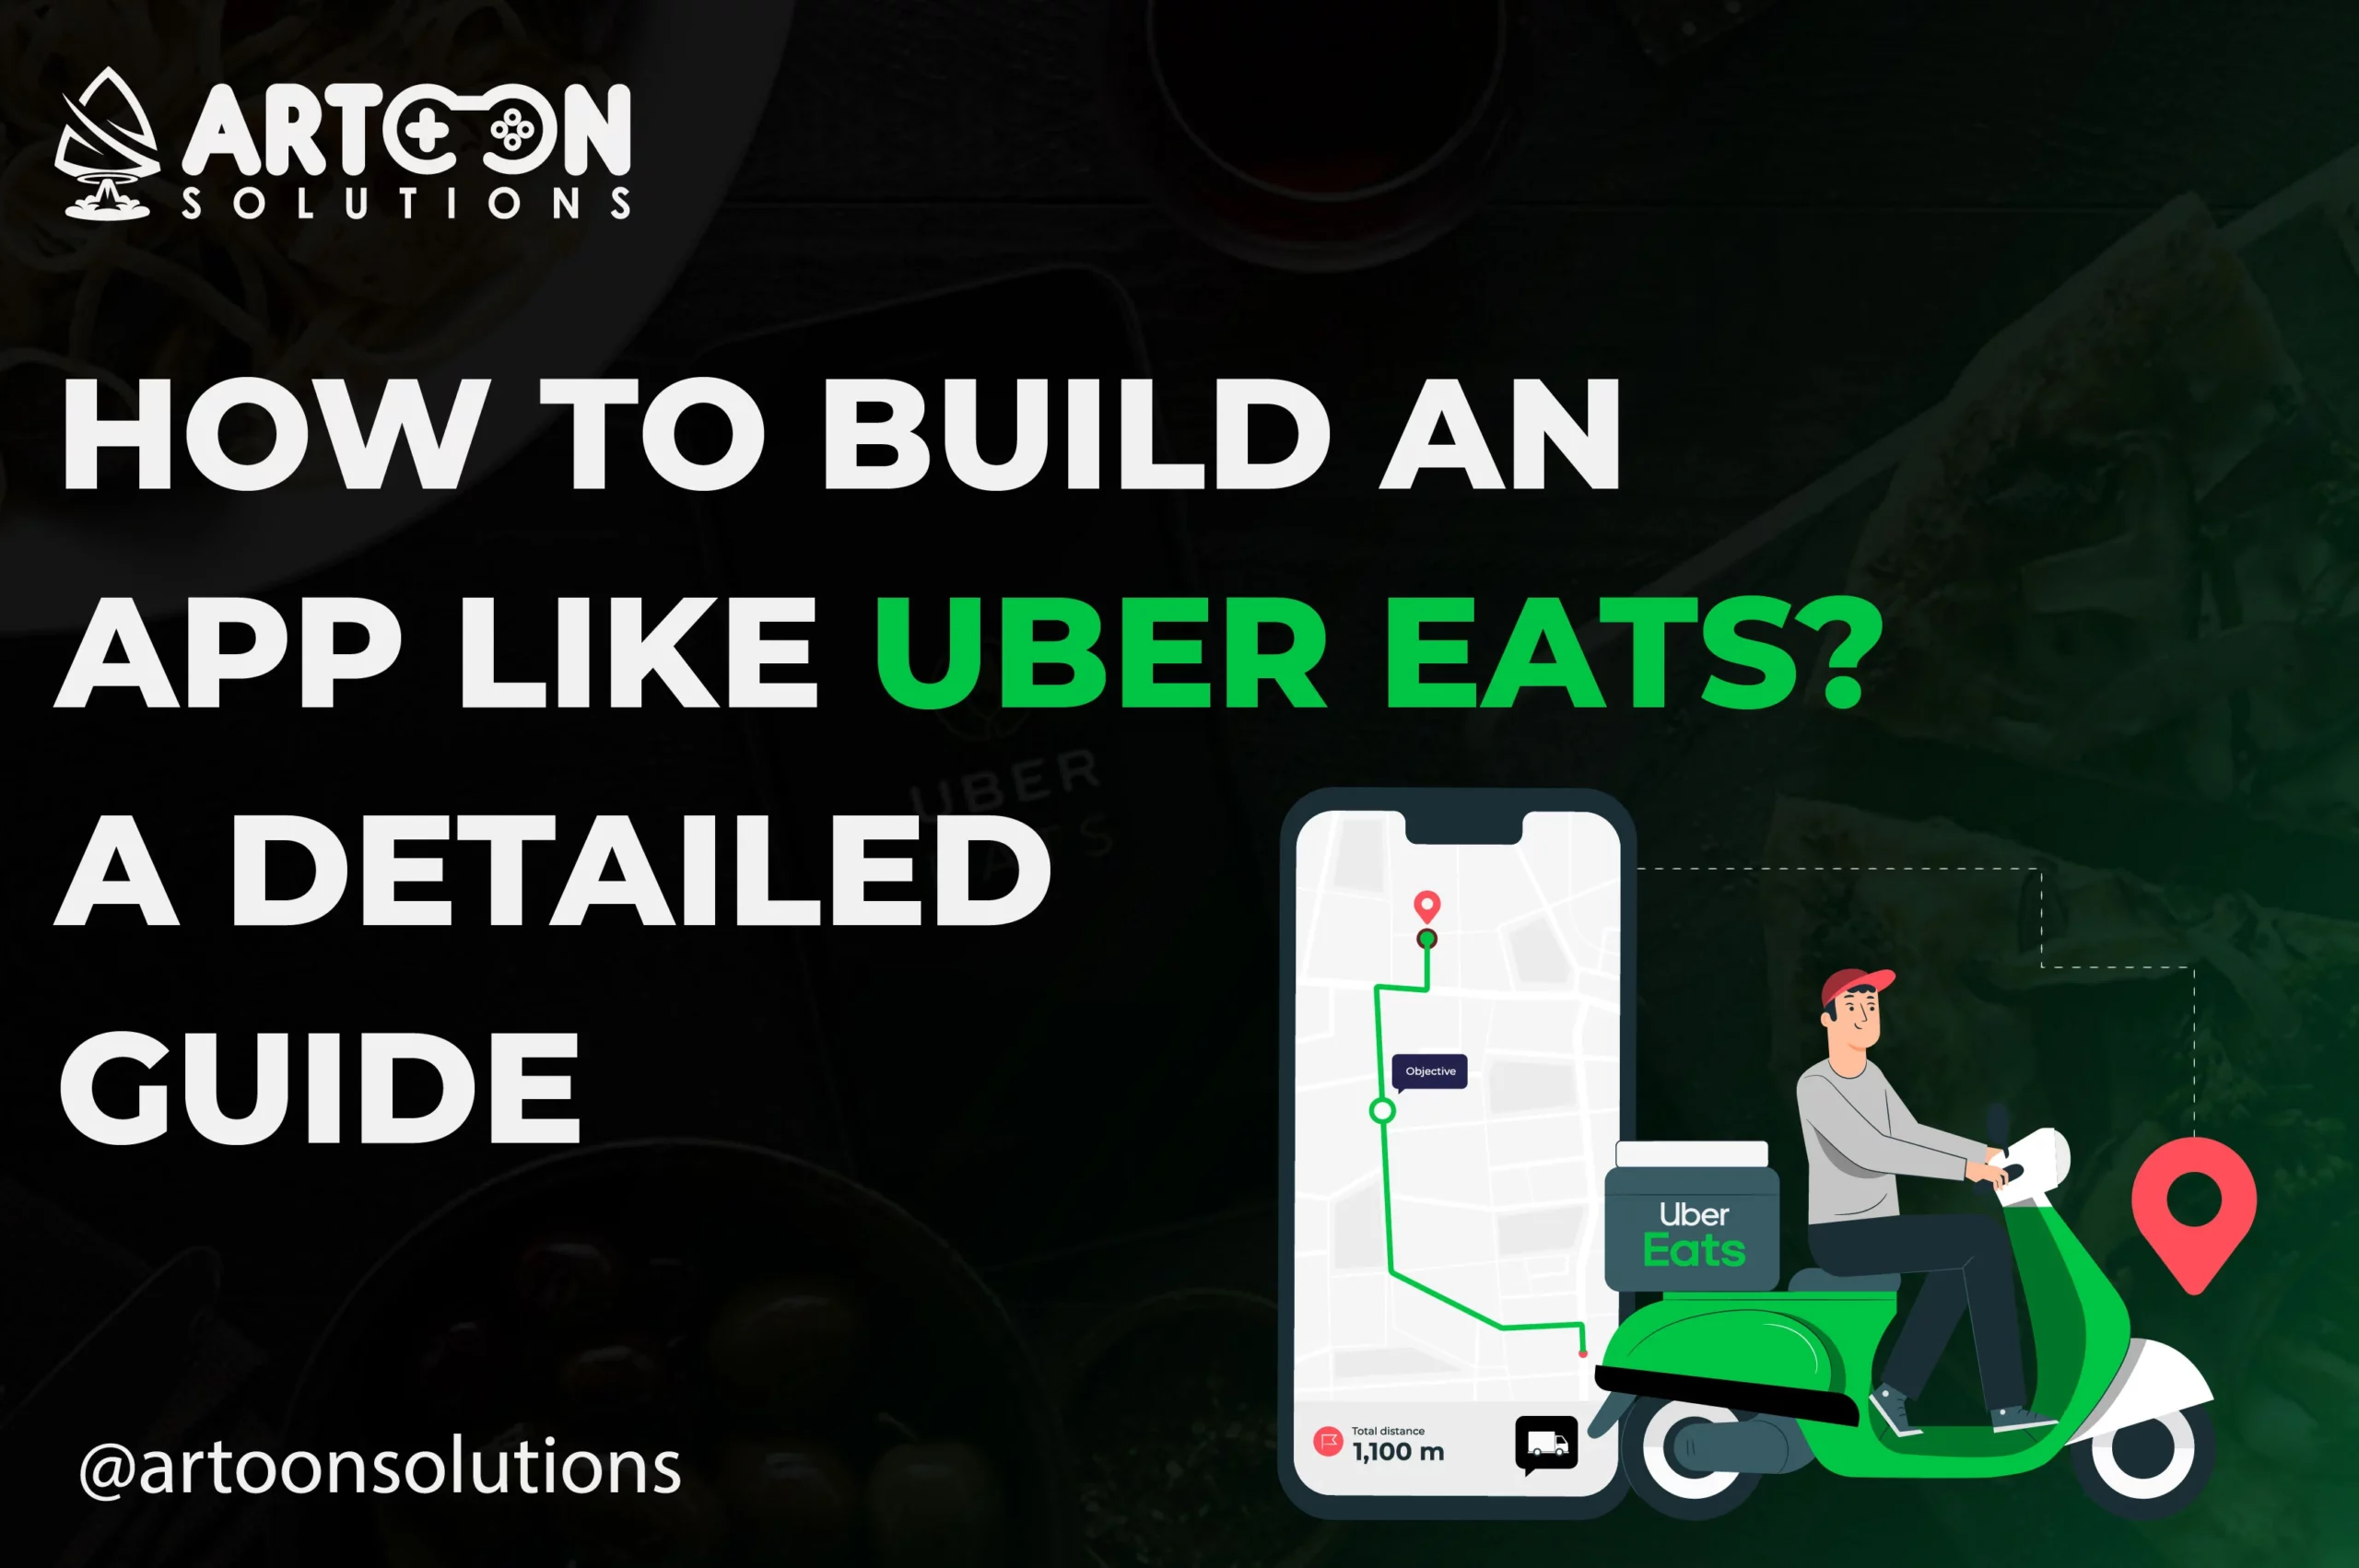 How to Build an App Like Uber Eats? A Detailed Guide